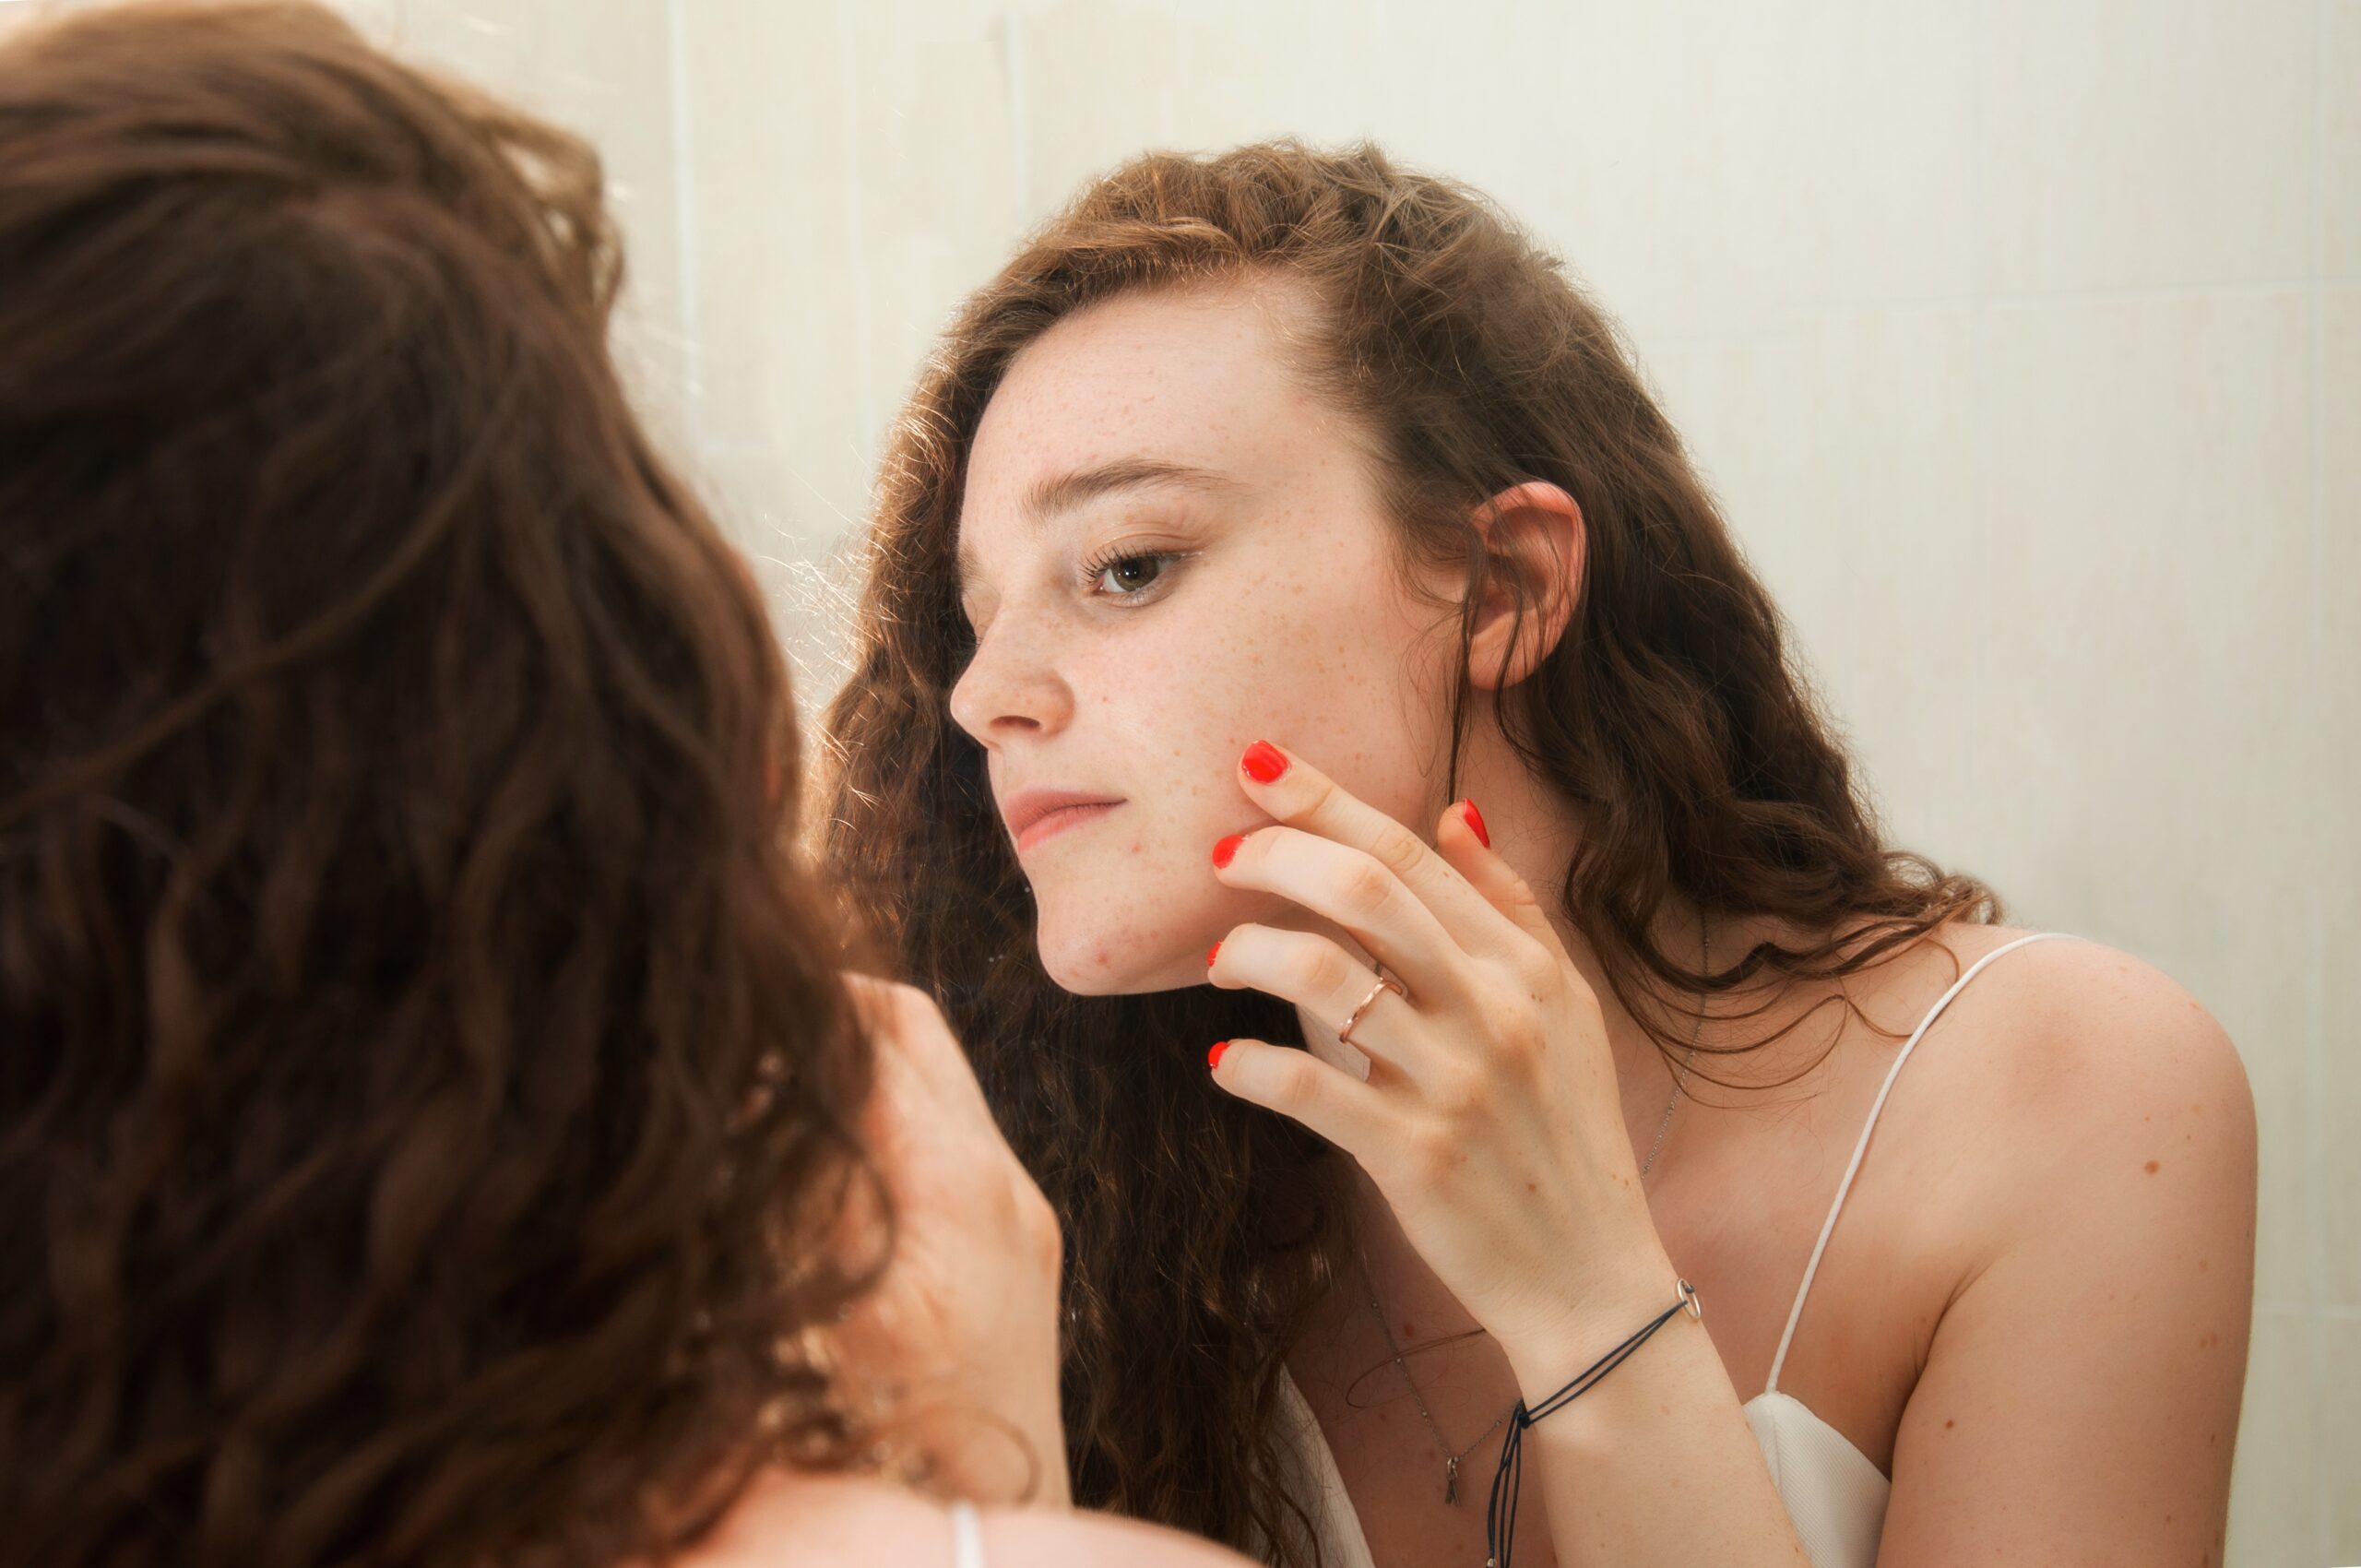 Acupuncture Treatment for Teens with Acne